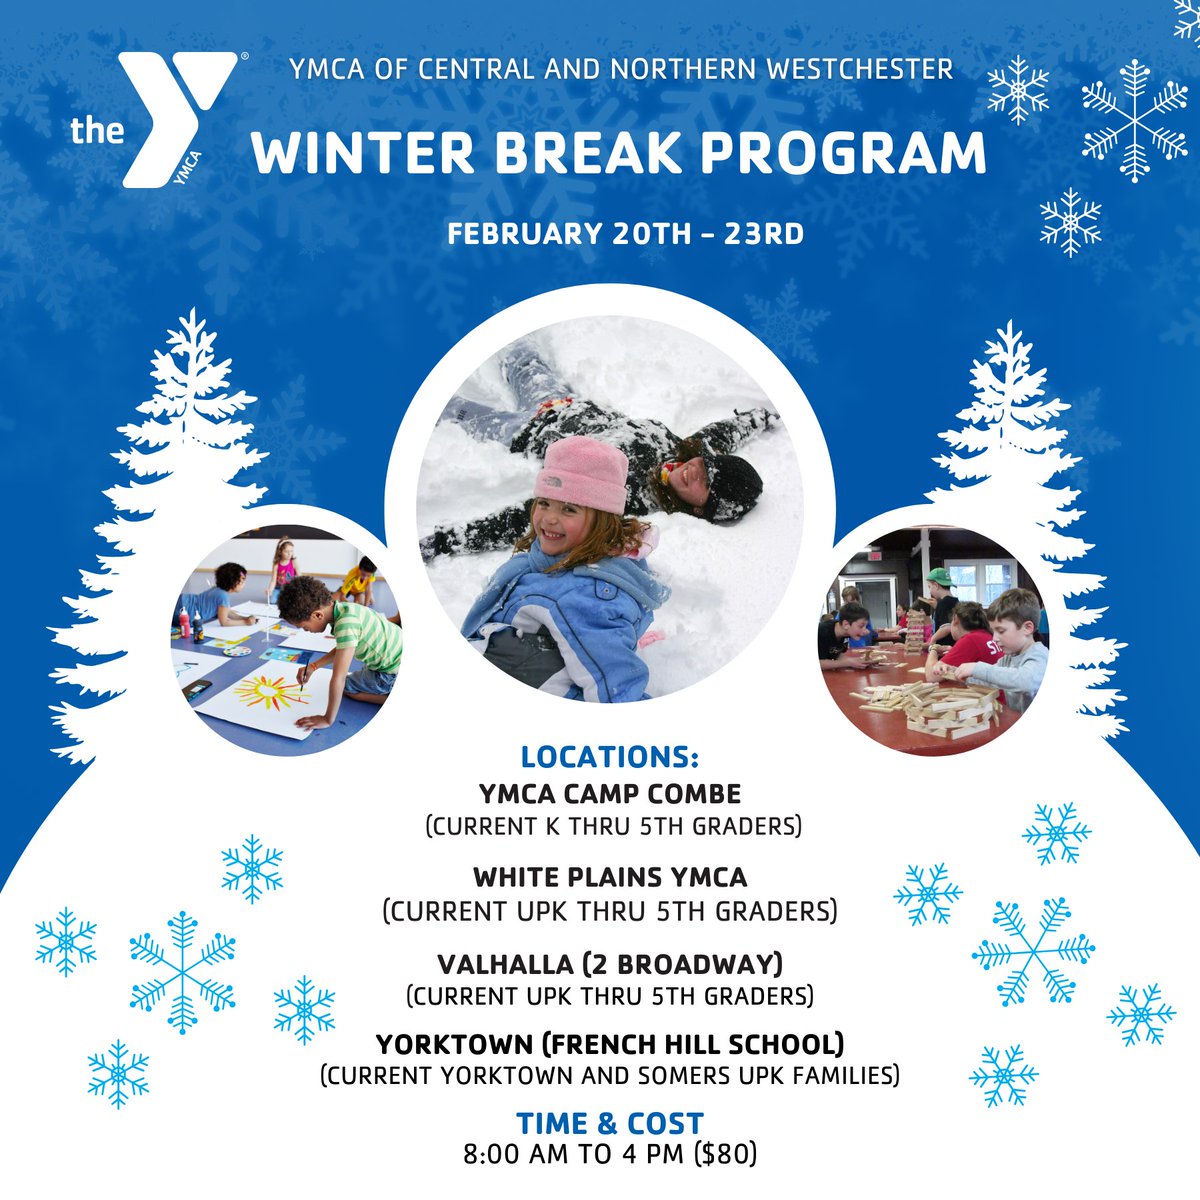 Our Winter Break Program promises days filled with laughter, learning, and the magic of the season! 
For more information email vferrara@ymca-cnw.org or cpia@ymca-cnw.org.

#OutOfSchoolTime #WinterRecess